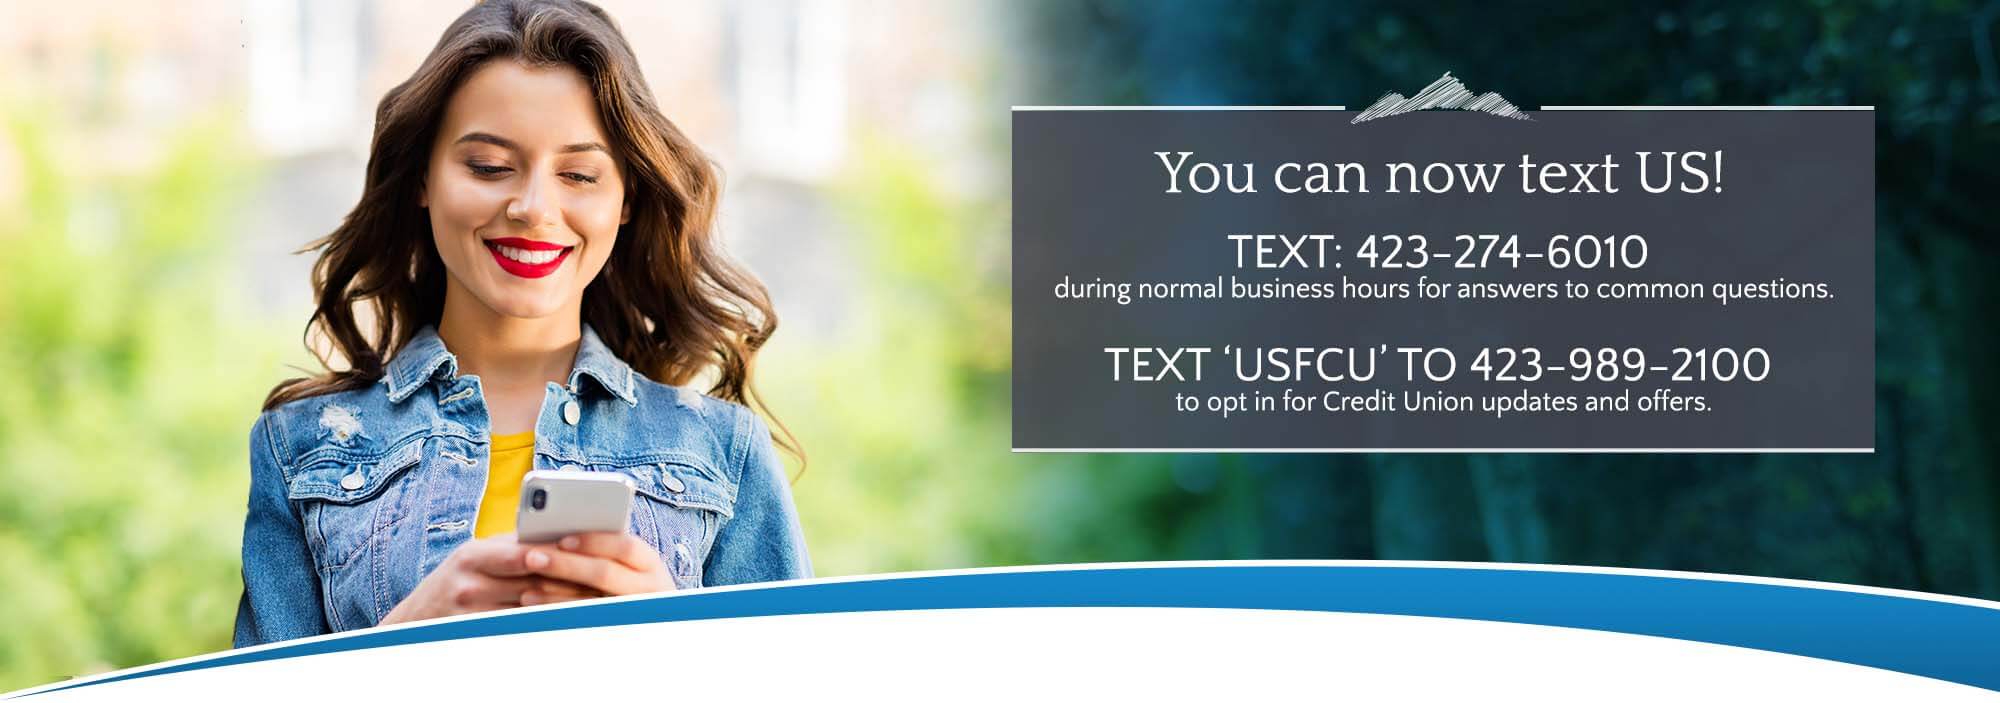 You can now test us! Text 423-274-6010 during normal business hours for answers to common questions. Text 'USFCU' to opt in for credit union updates and offers.